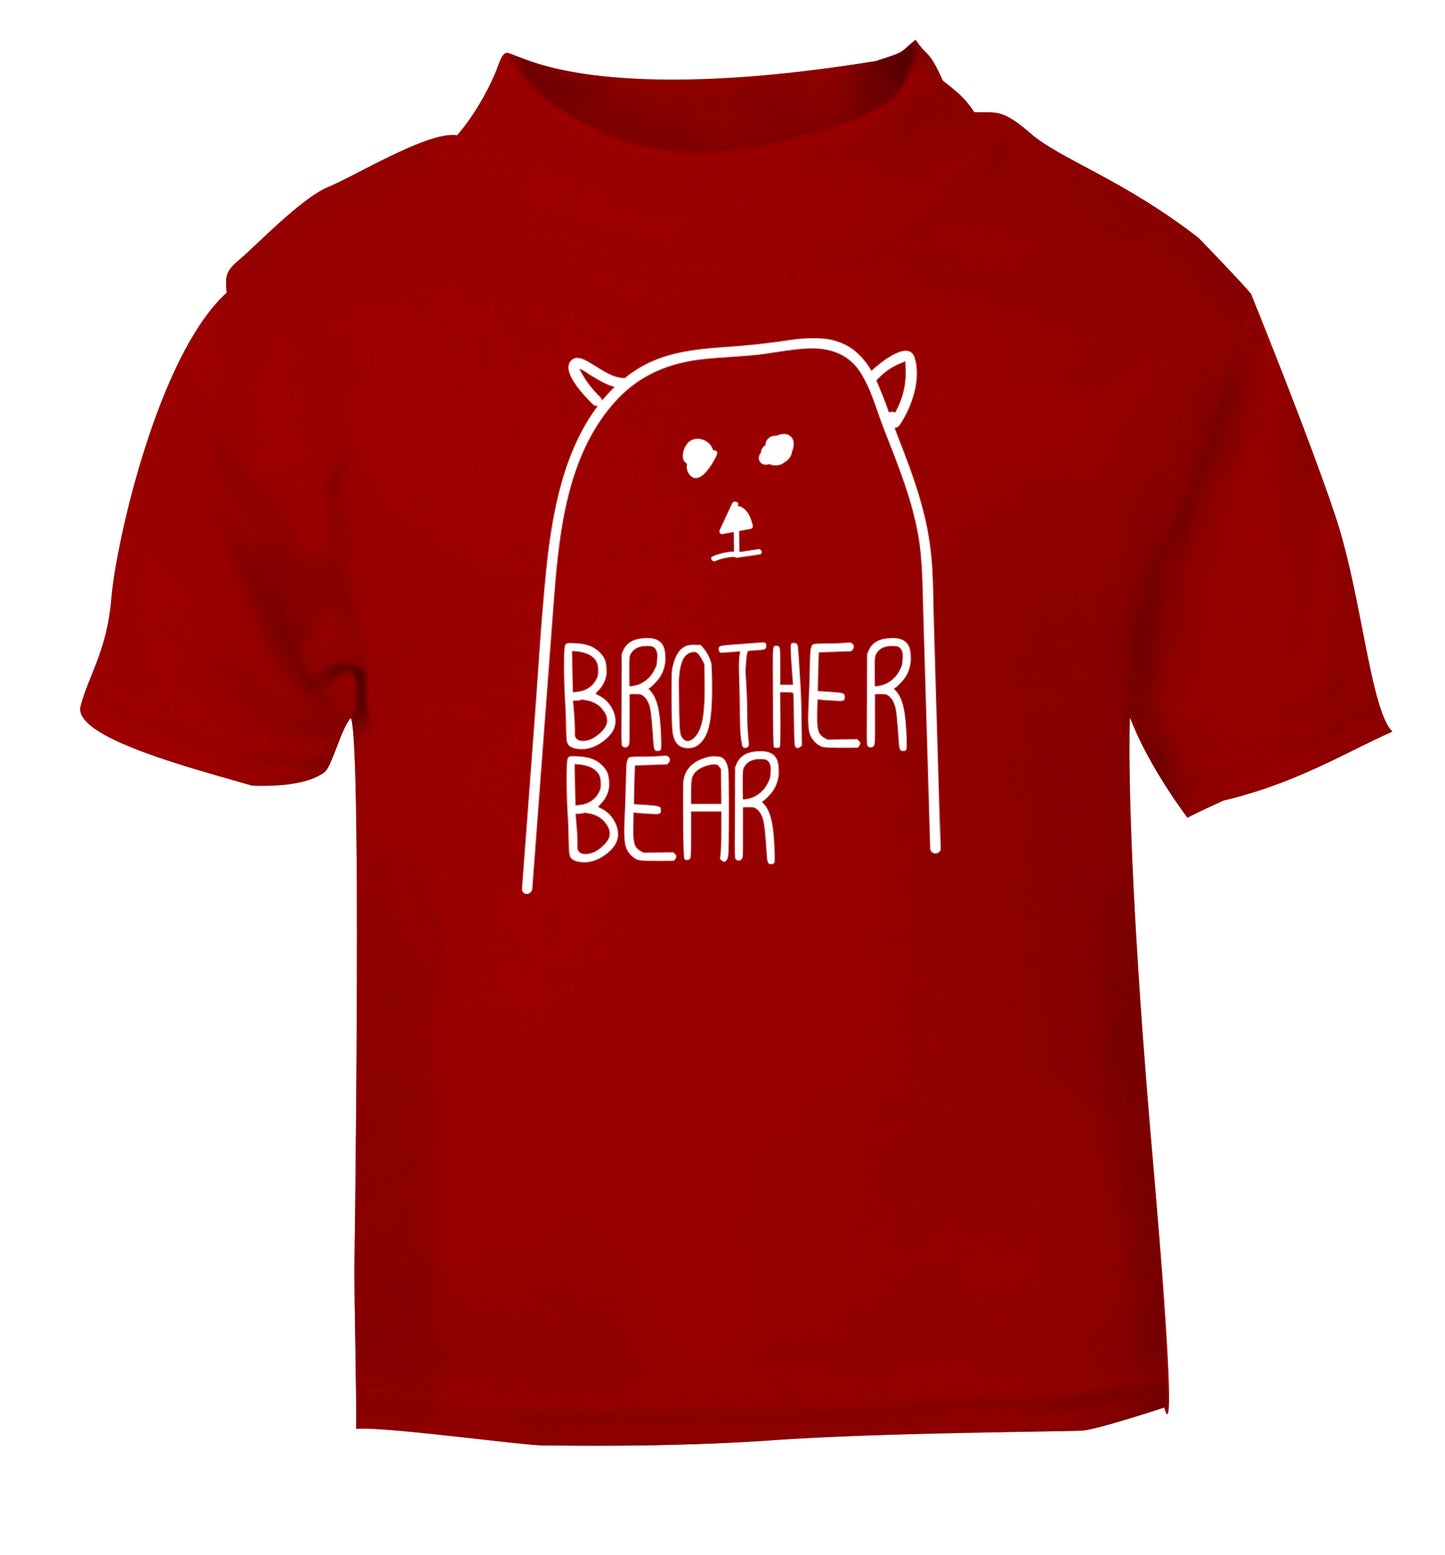 Brother bear red Baby Toddler Tshirt 2 Years